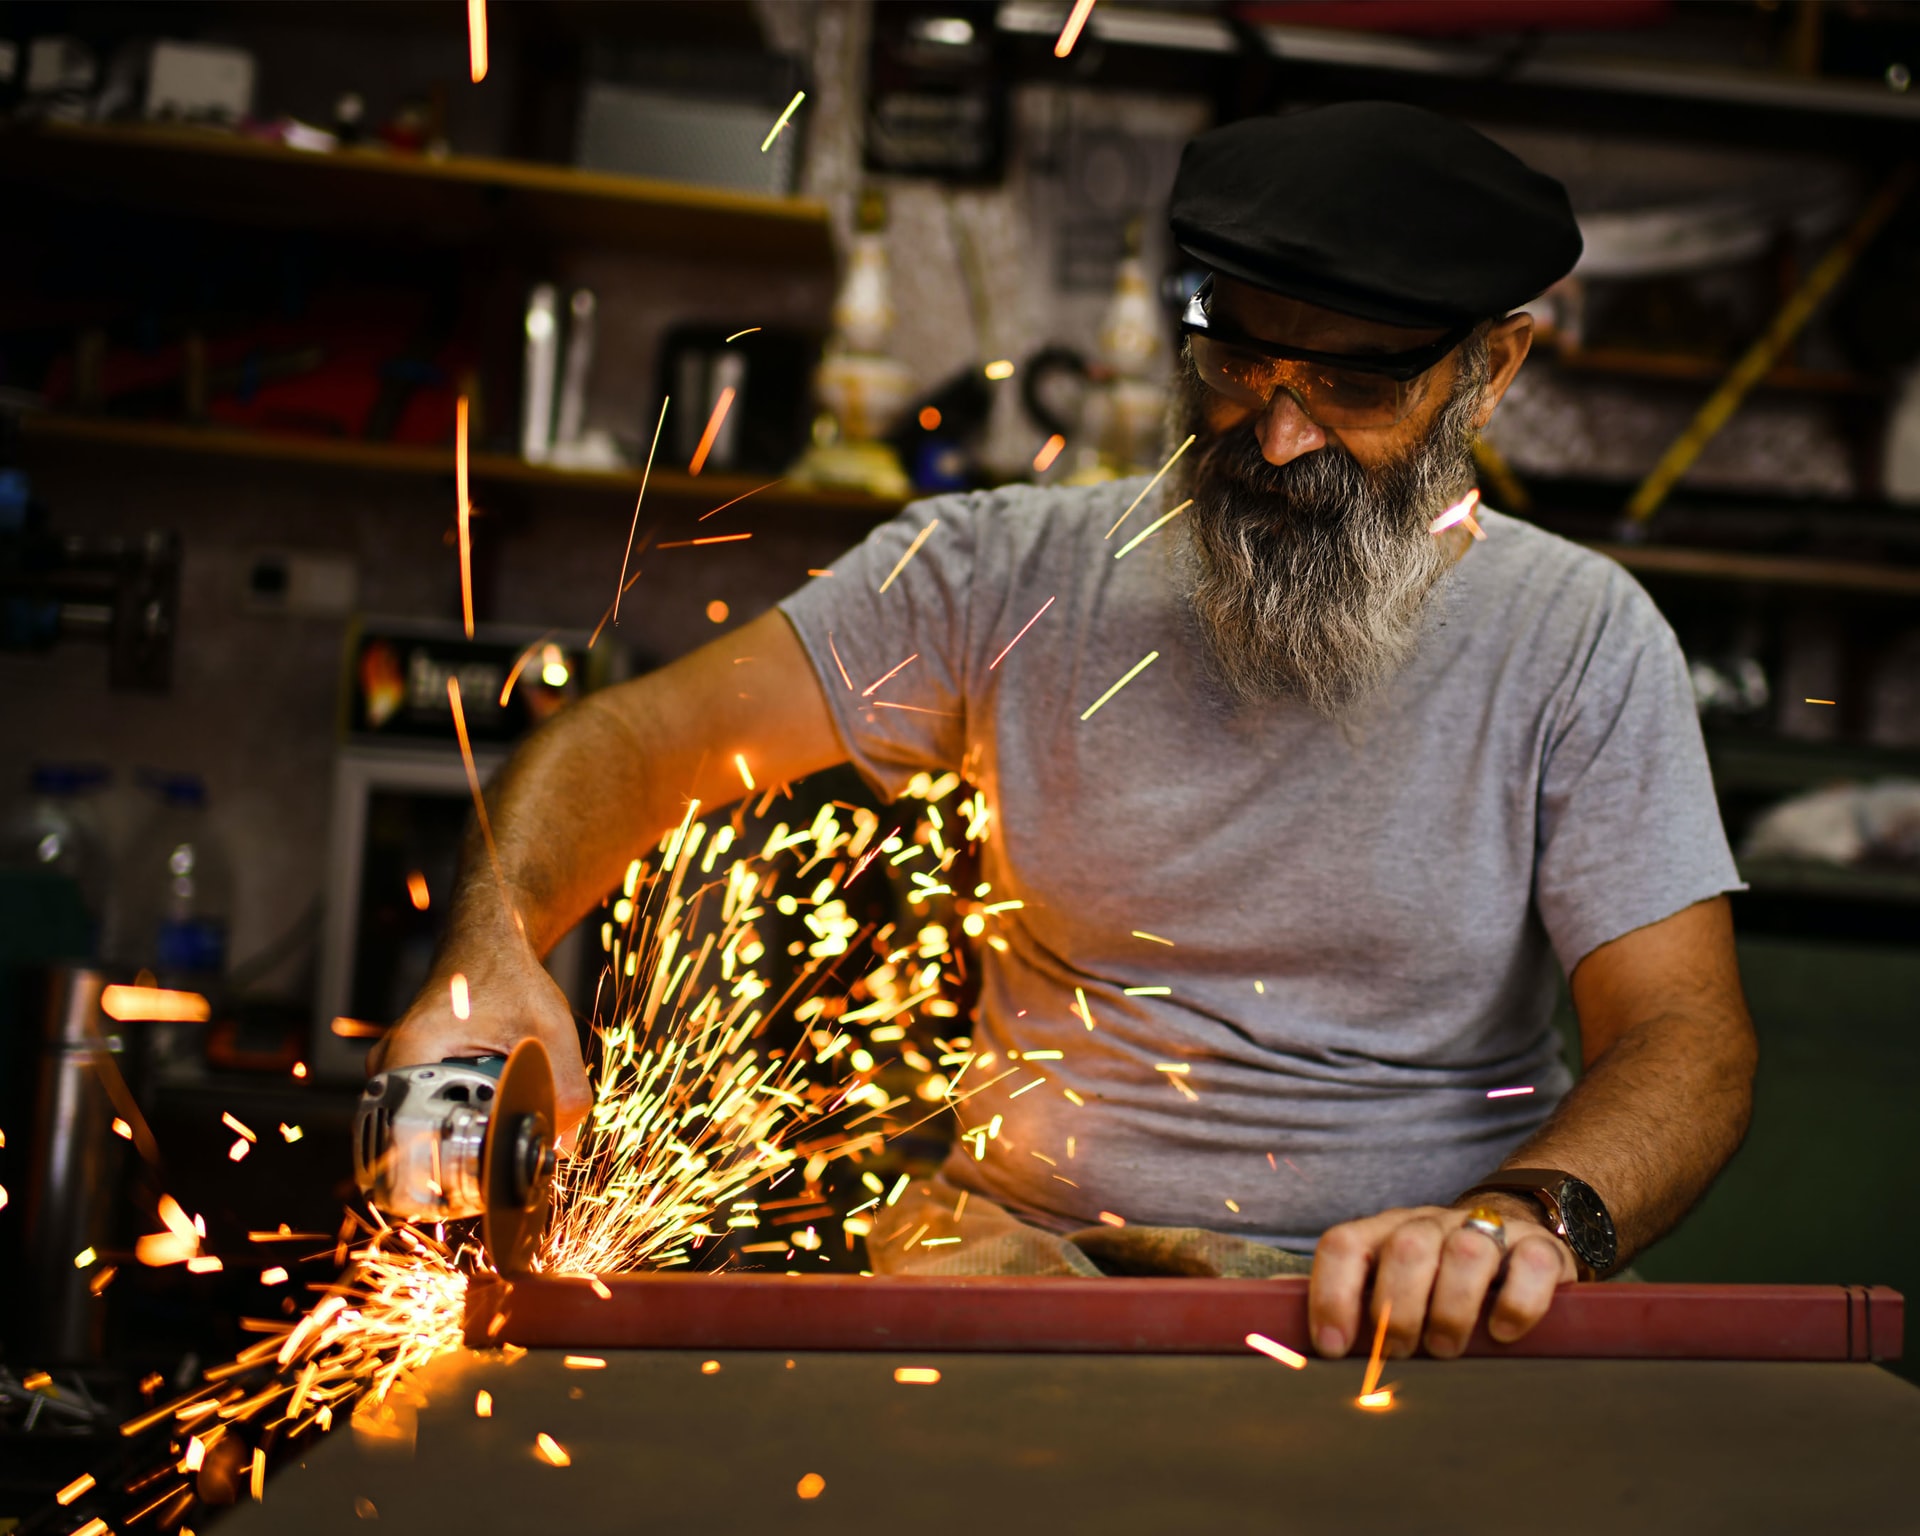 A grey bearded man using an angle grinder to cut metal. Sparks fly from the grinding wheel